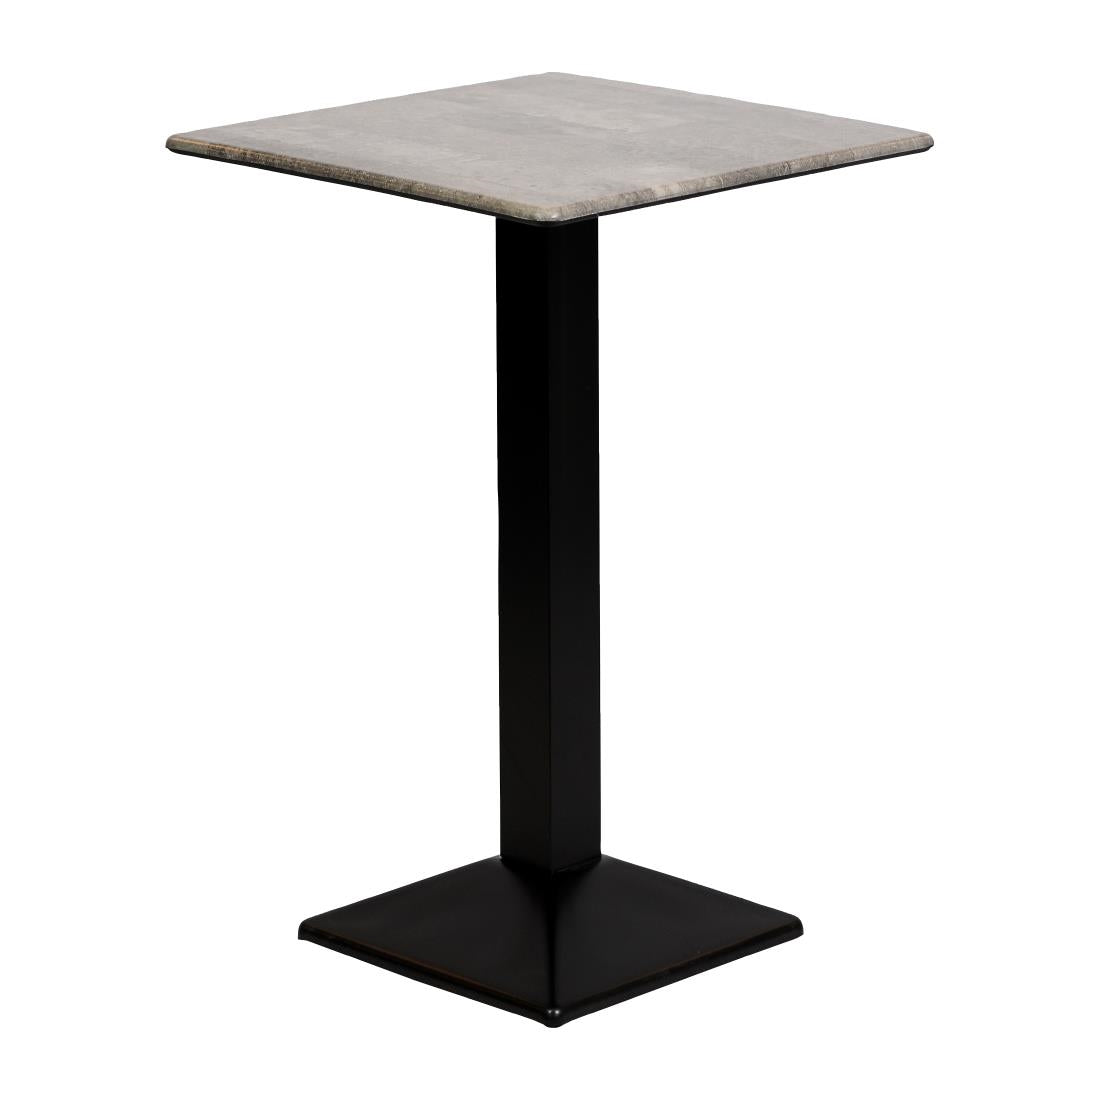 CZ831 Turin Metal Base Square Poseur Table with Laminate Top Concrete 700mm JD Catering Equipment Solutions Ltd